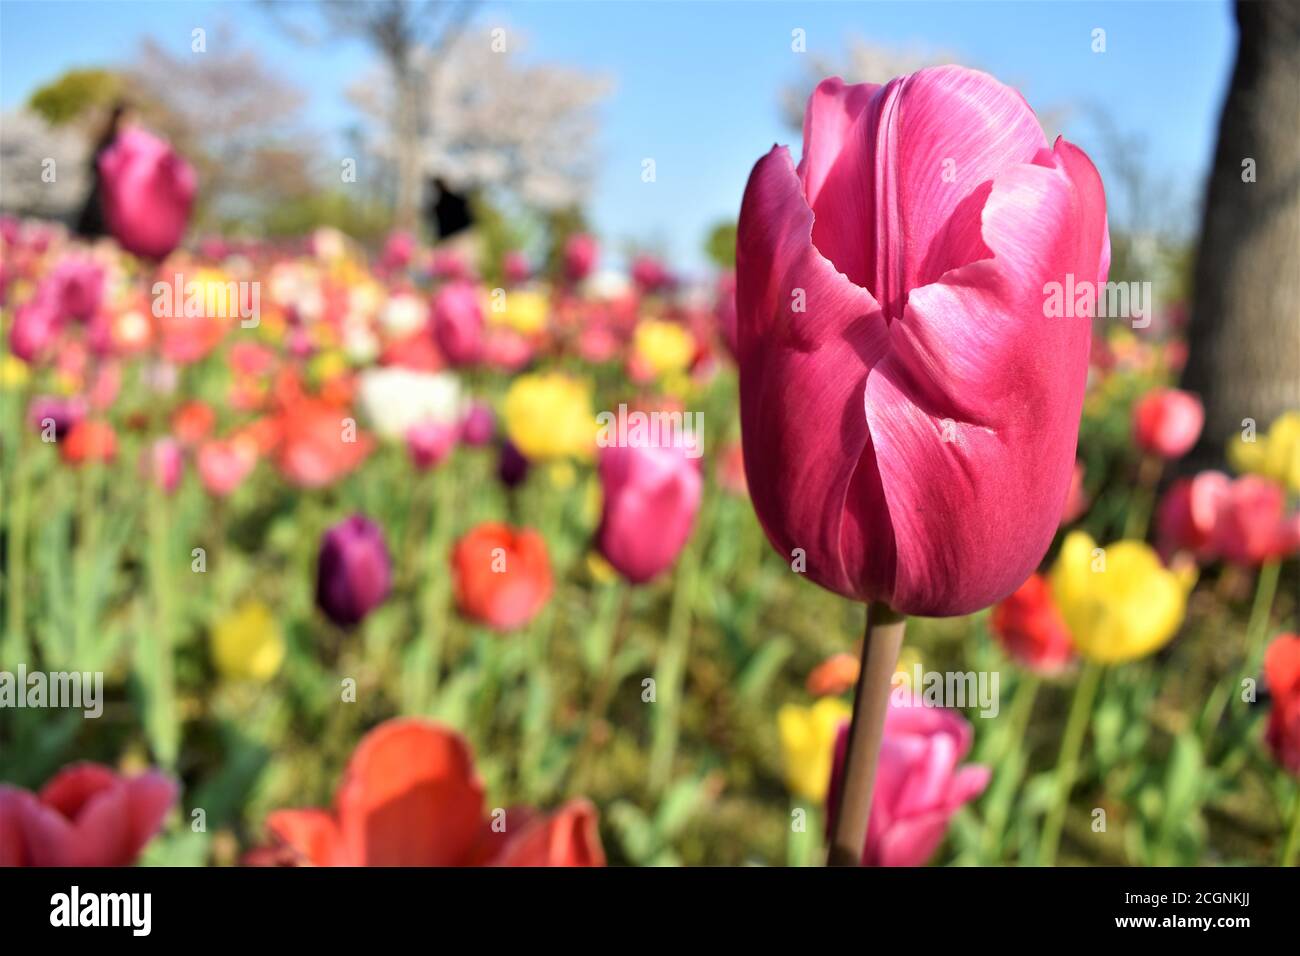 A field of beautiful pink, yellow and red tulips that are in full bloom Stock Photo